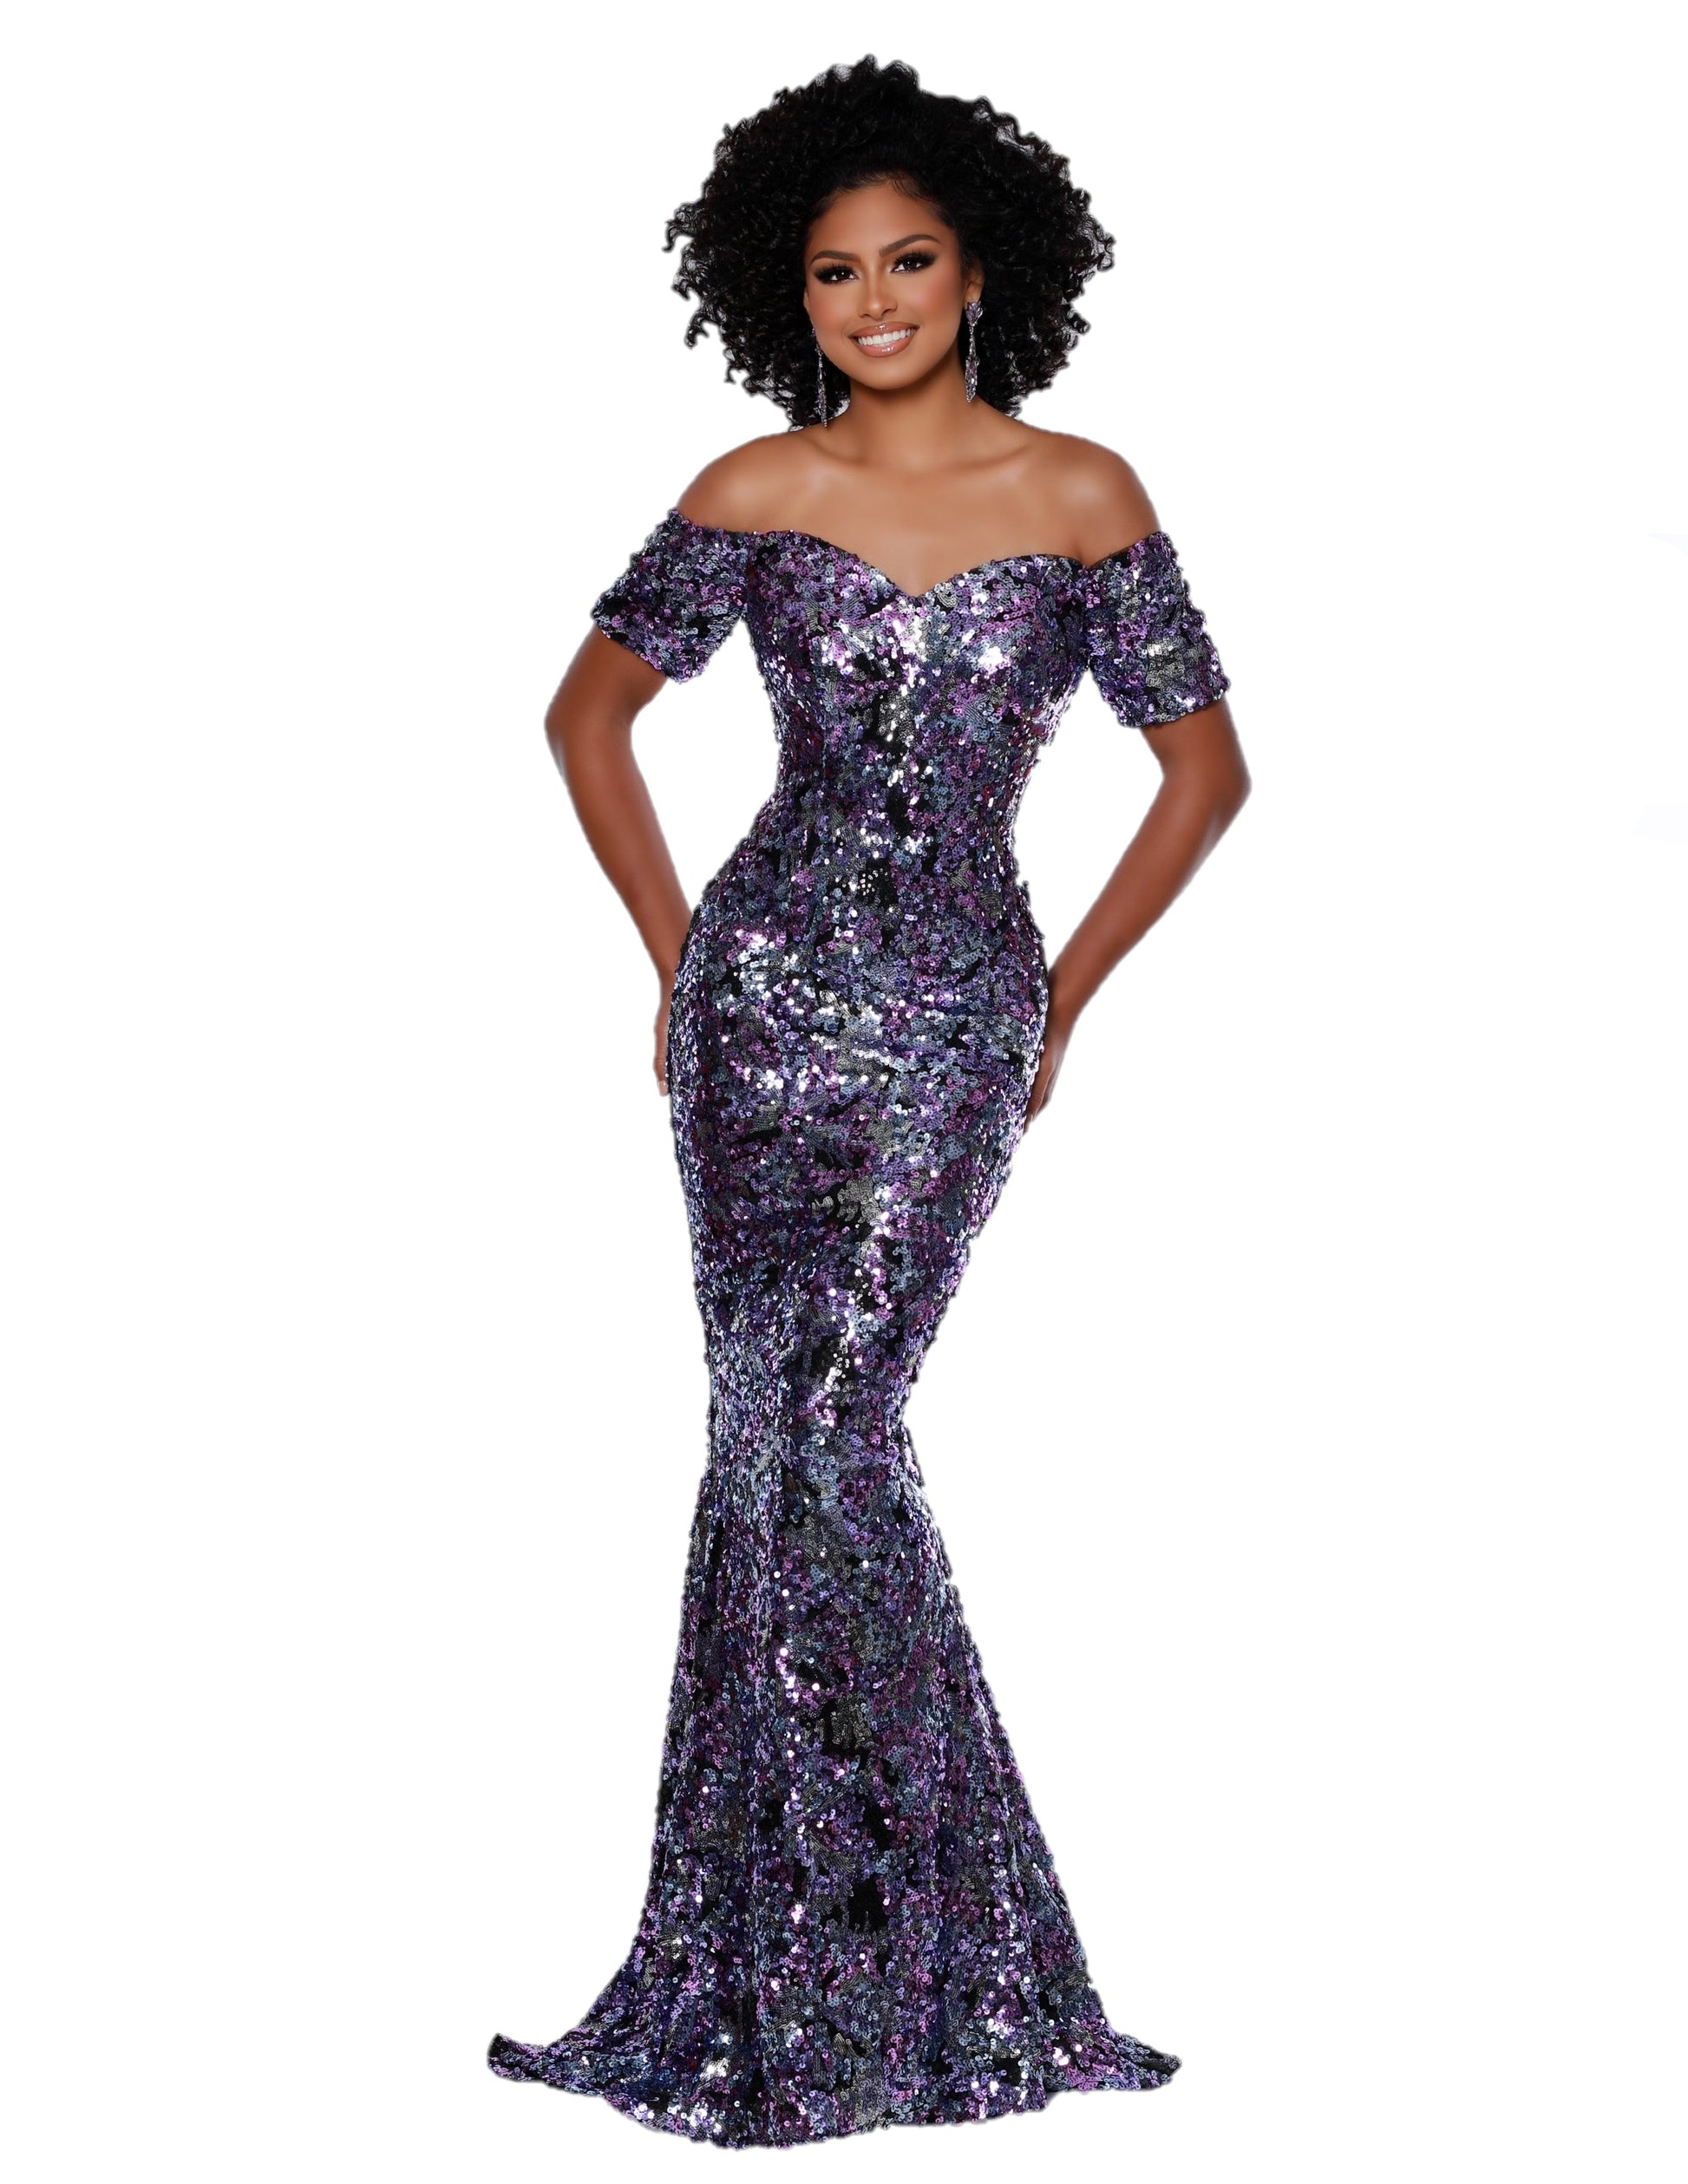 Johnathan Kayne 2417 Long Fitted Sequin off The shoulder Dress Formal Gown  Available Sizes: 0-18  Available Colors: Fuchsia/Multi, Purple/Multi